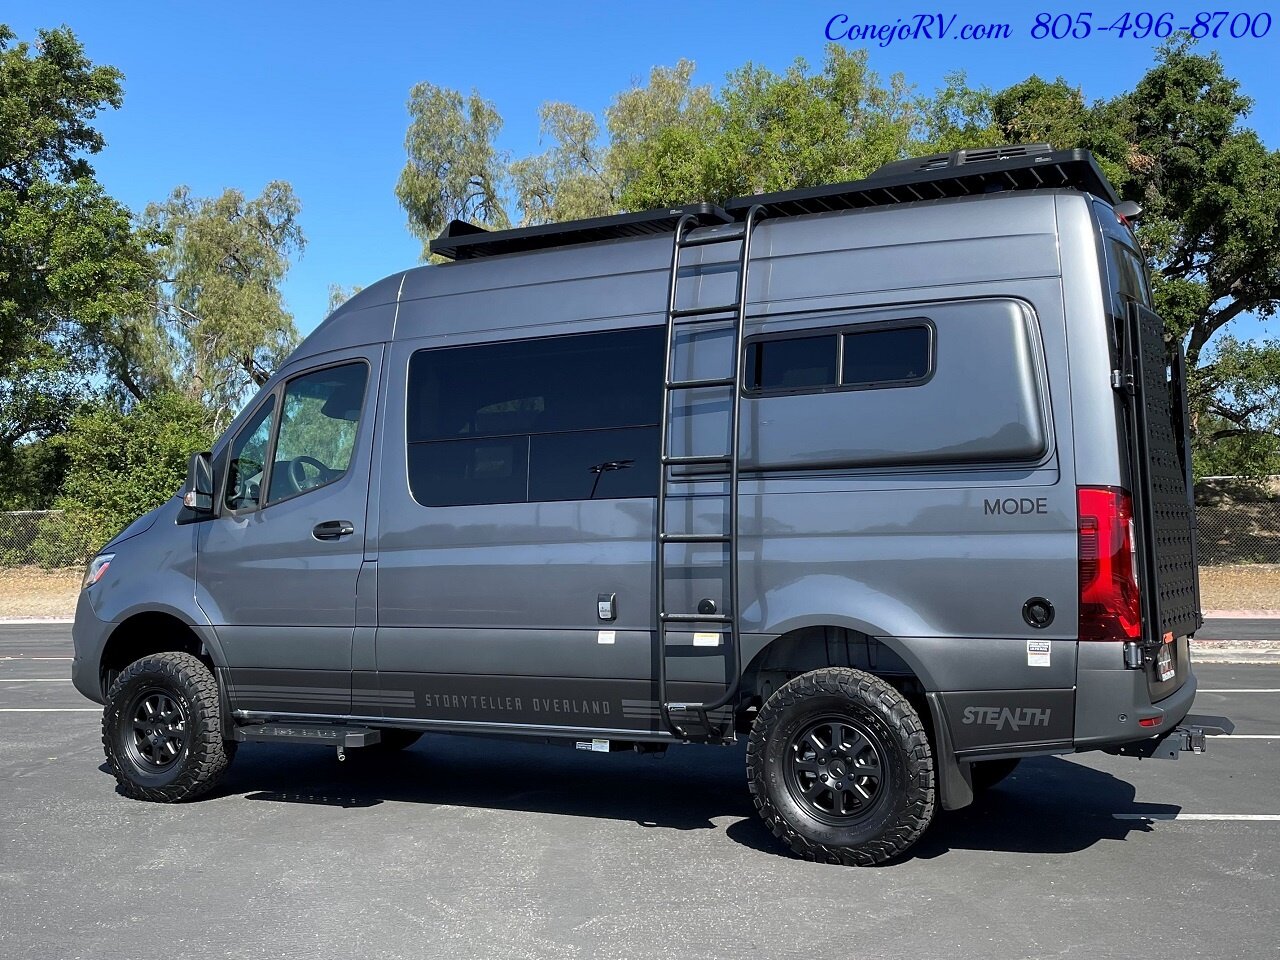 2023 Storyteller Overland Stealth Mode AWD DEALER DEMO 4 cyl H.O.with 9 Speed  Transmission - Photo 2 - Thousand Oaks, CA 91360